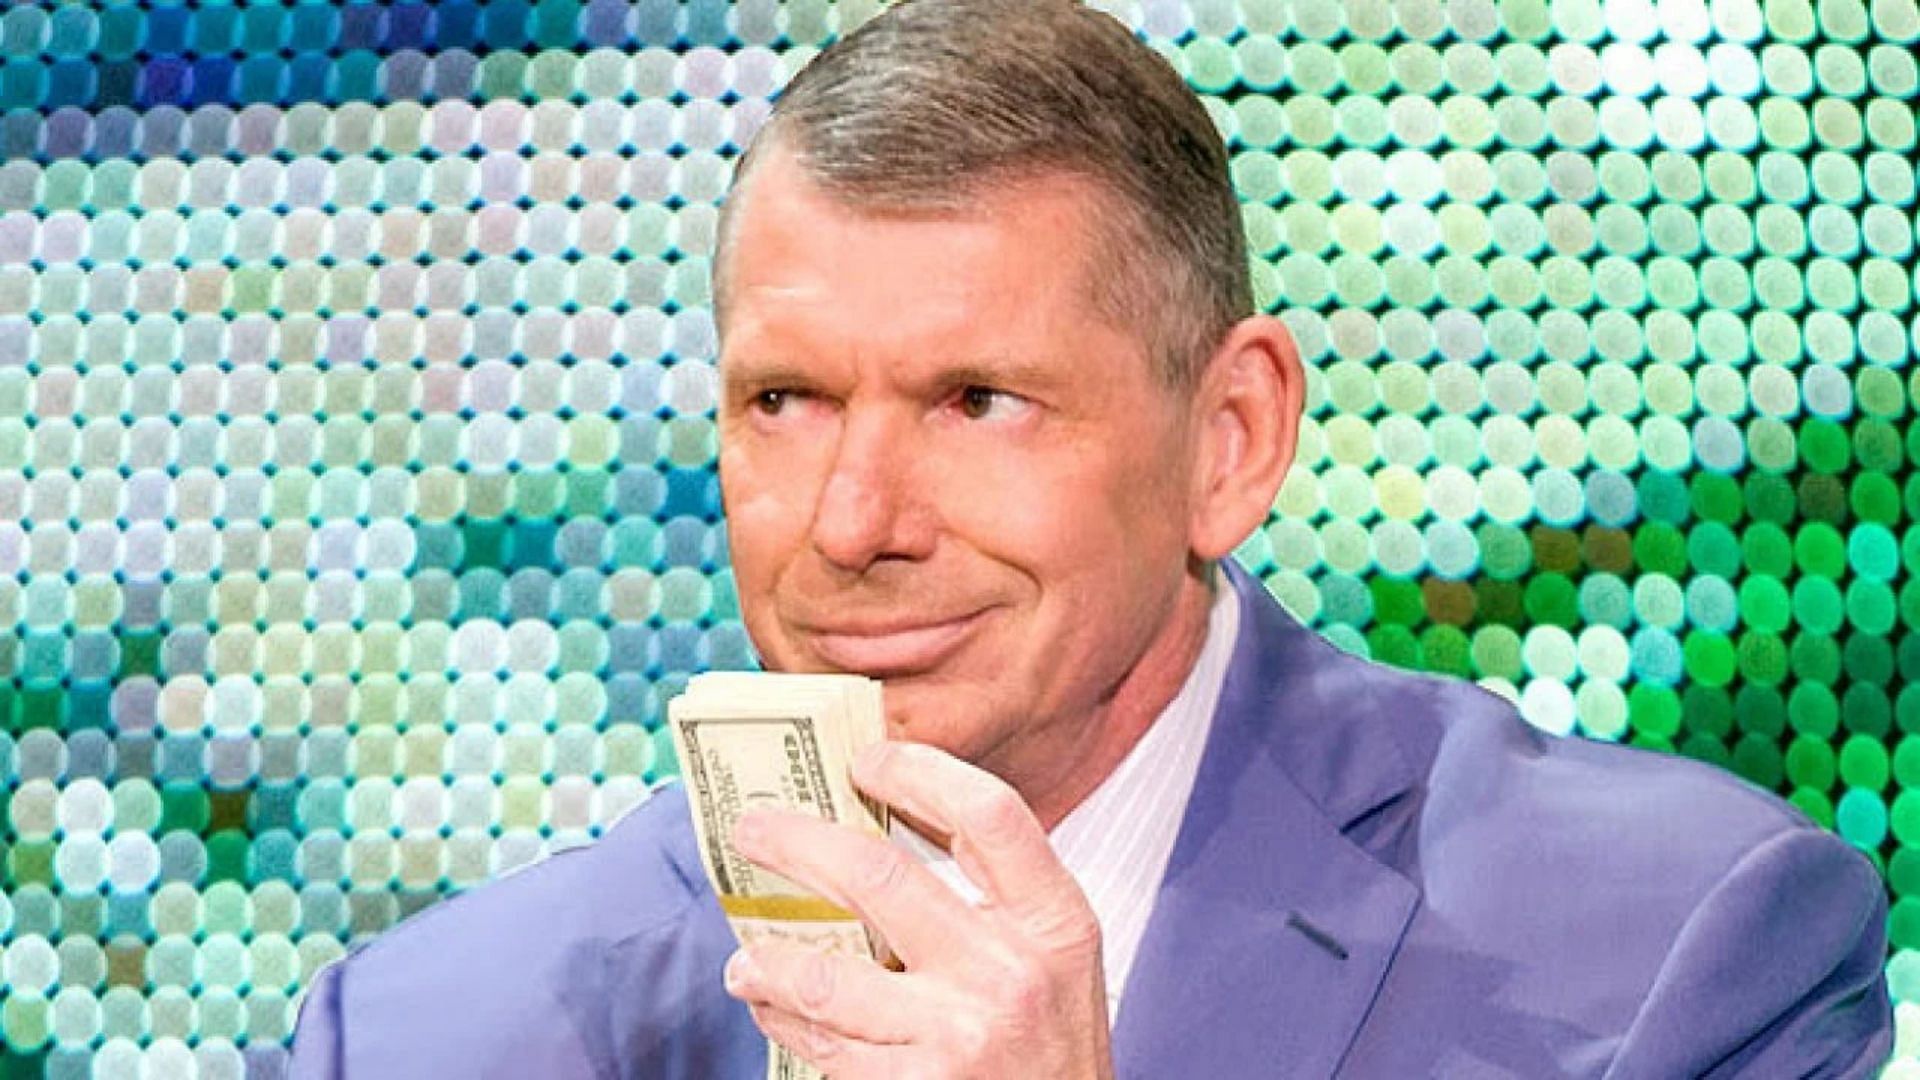 Vince McMahon is the former chairman of WWE